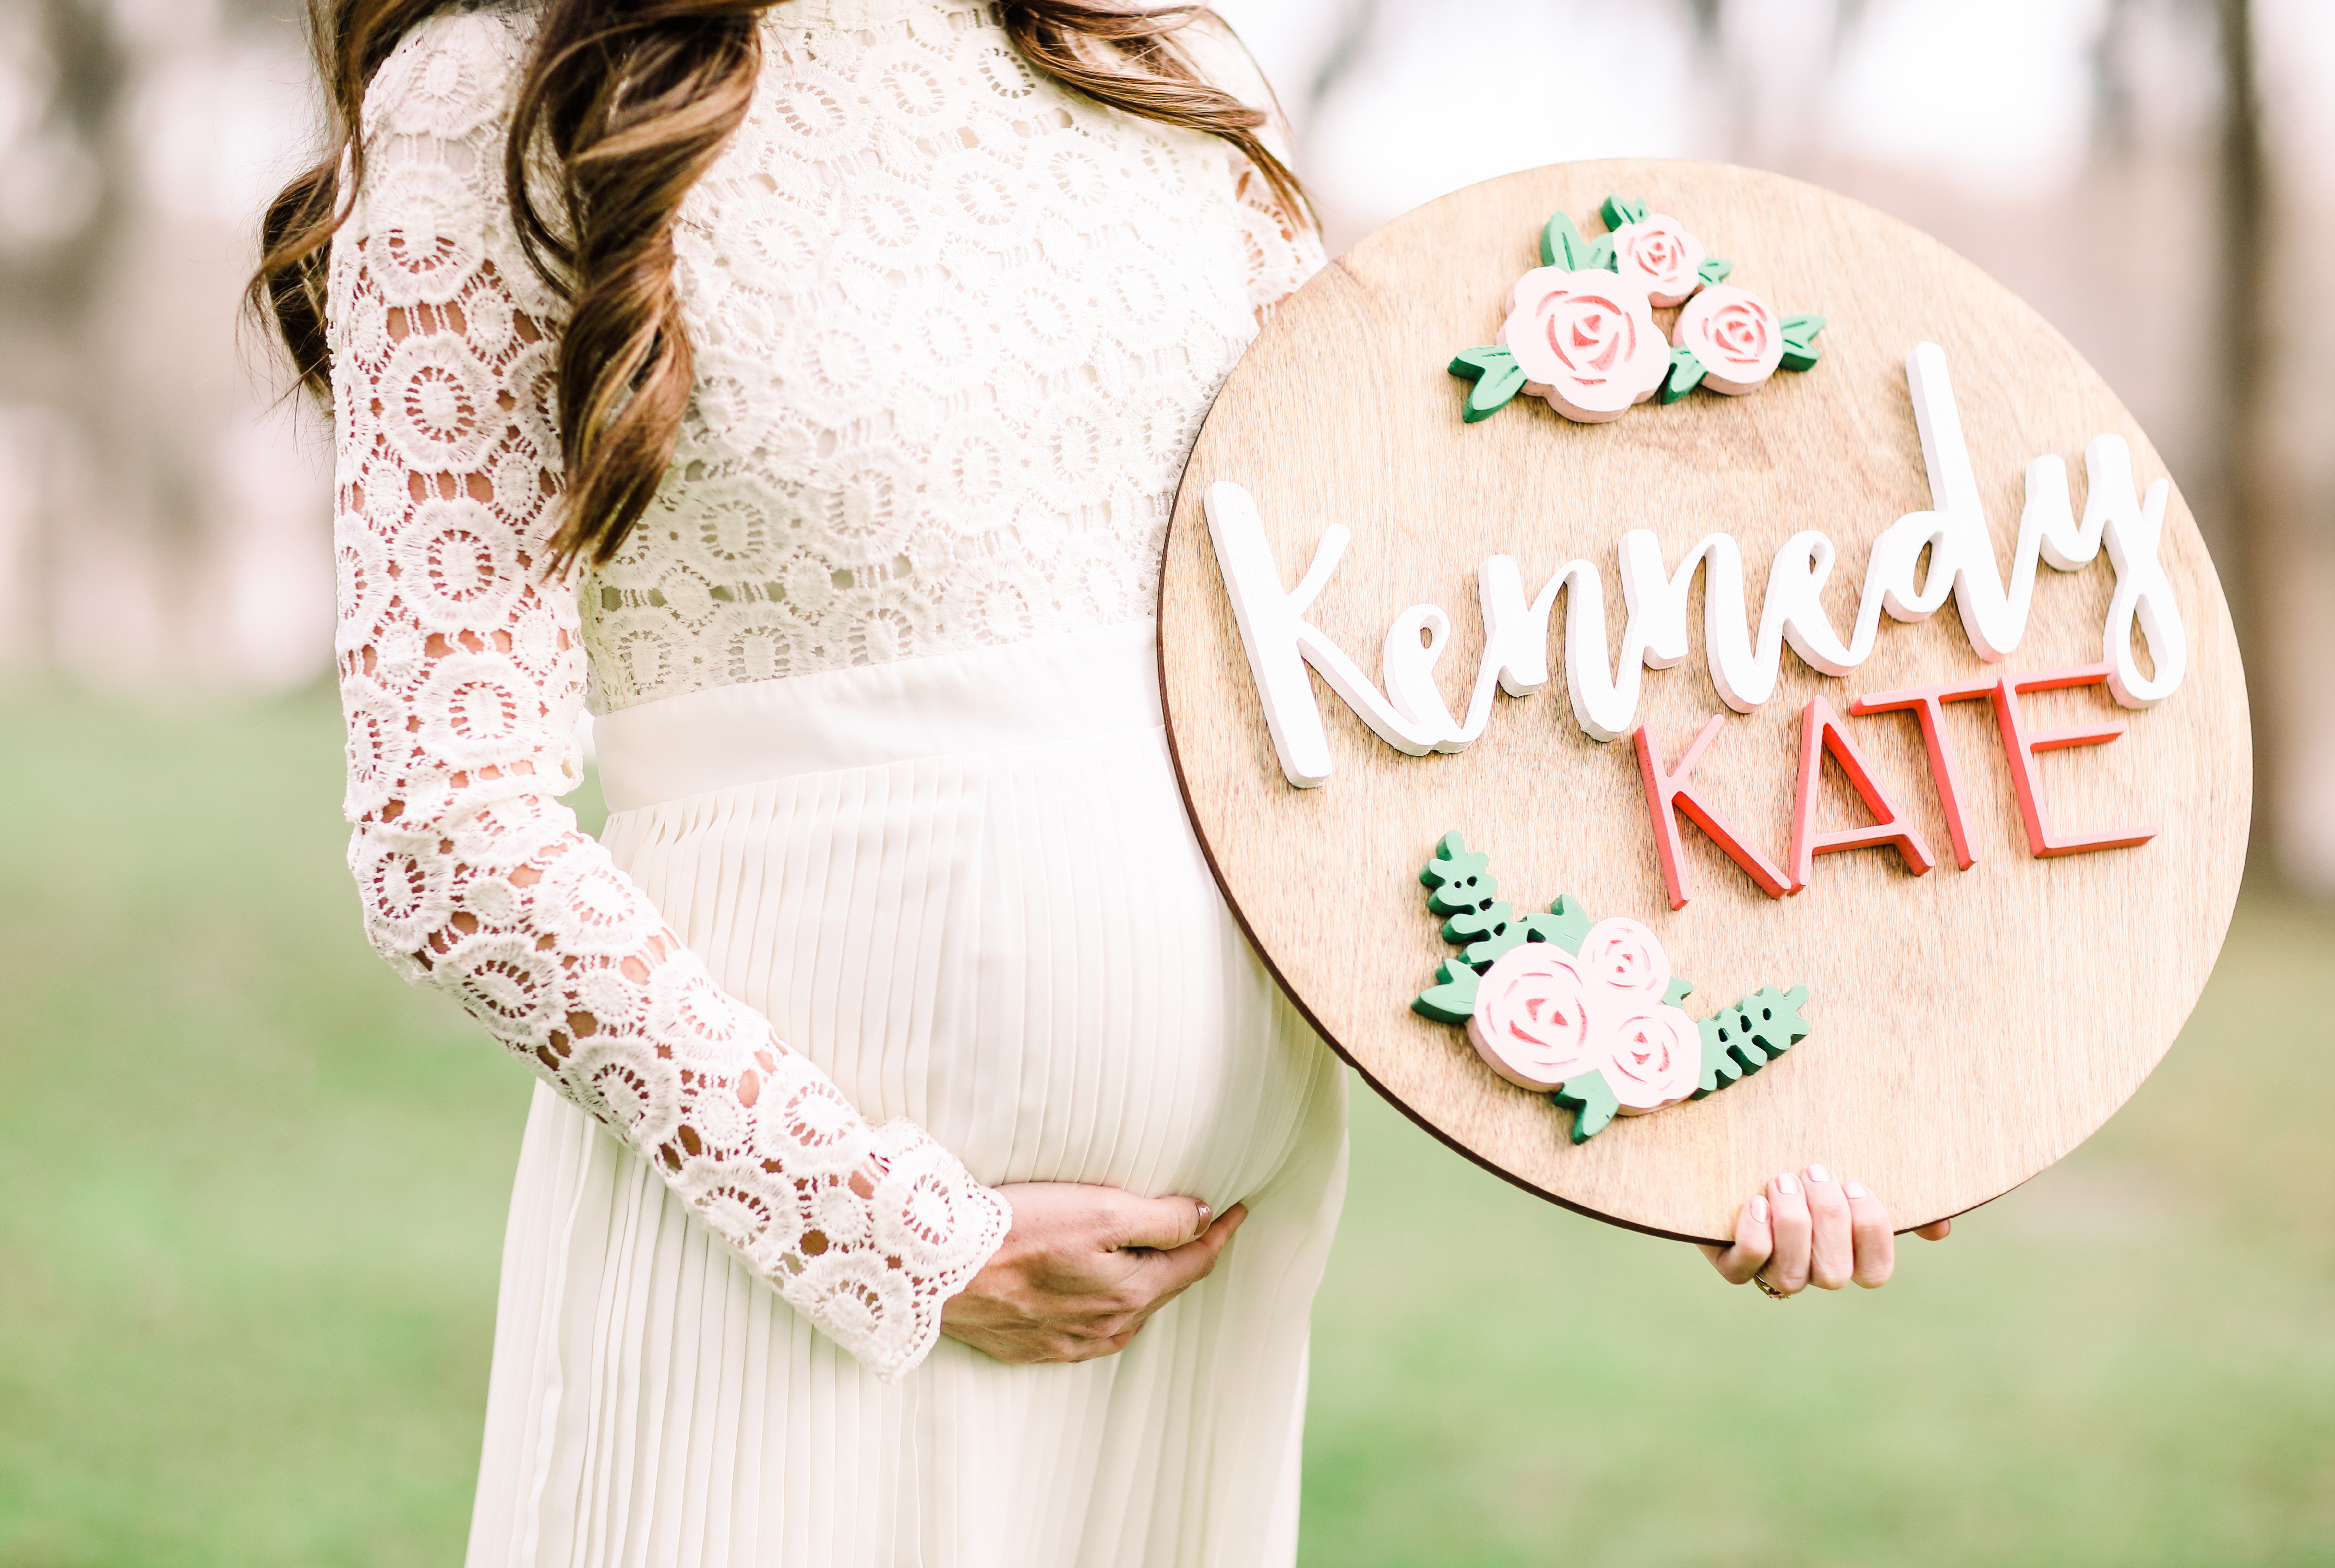 A small preview of waiting on little Kennedy Kate!